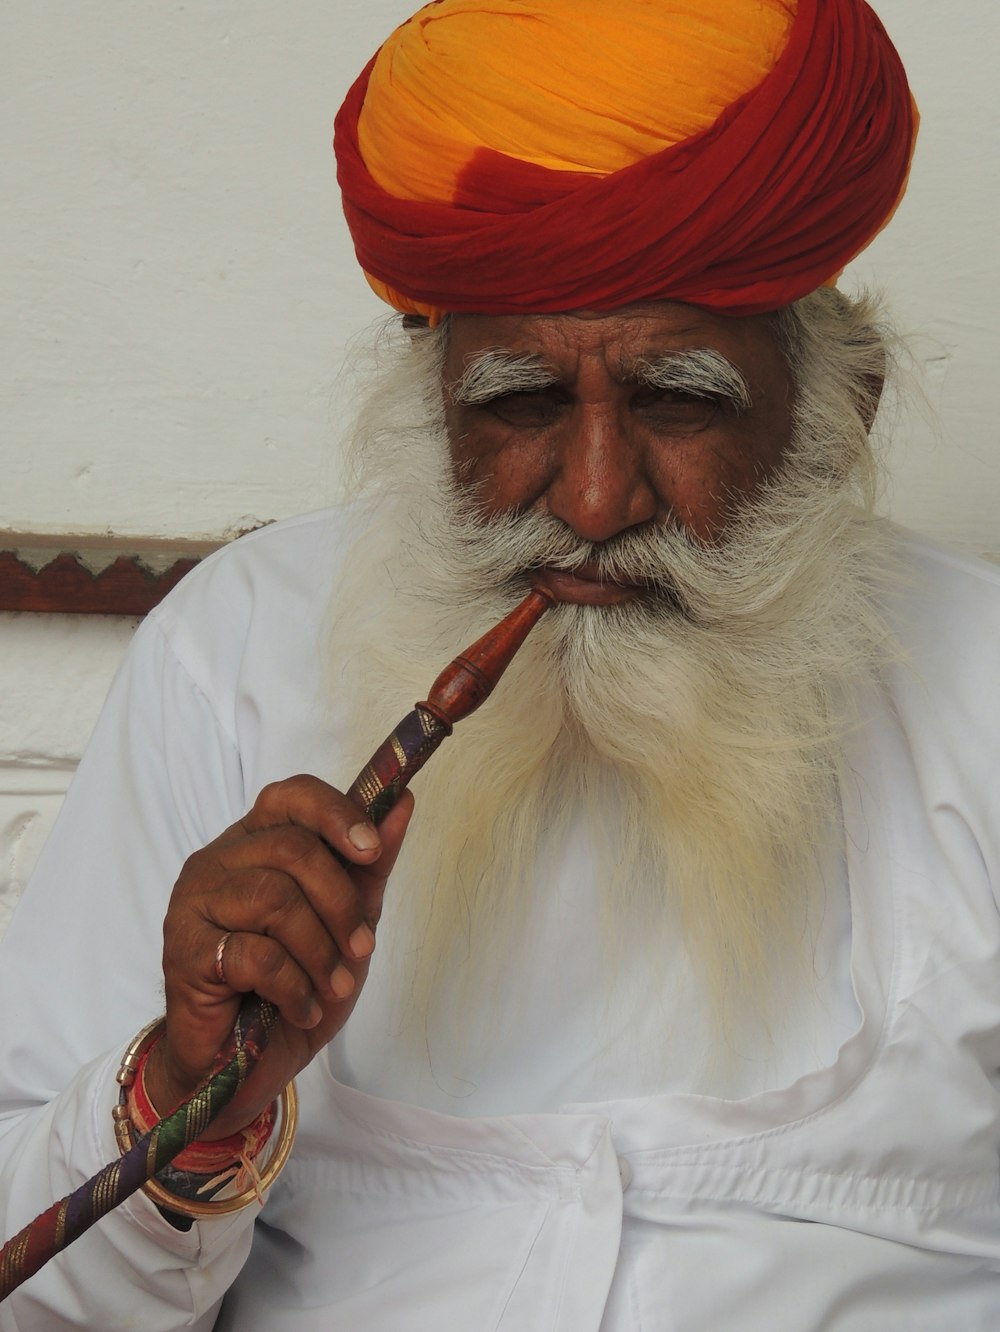 a man in a turban with a pipe in his mouth